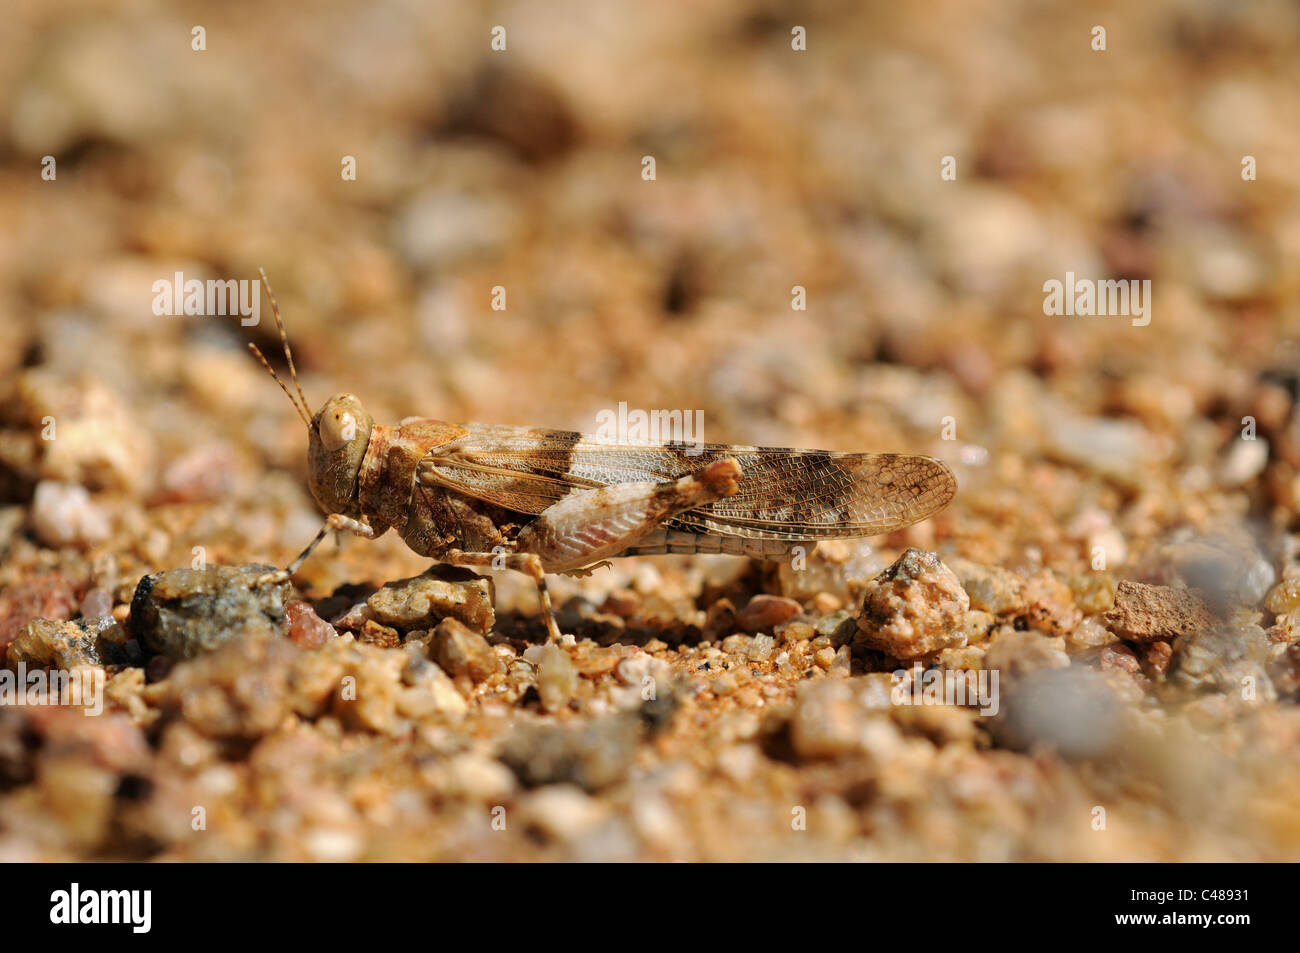 Burrowing grasshopper, matching the color of soil and stones, Namaqualand, South Africa Stock Photo